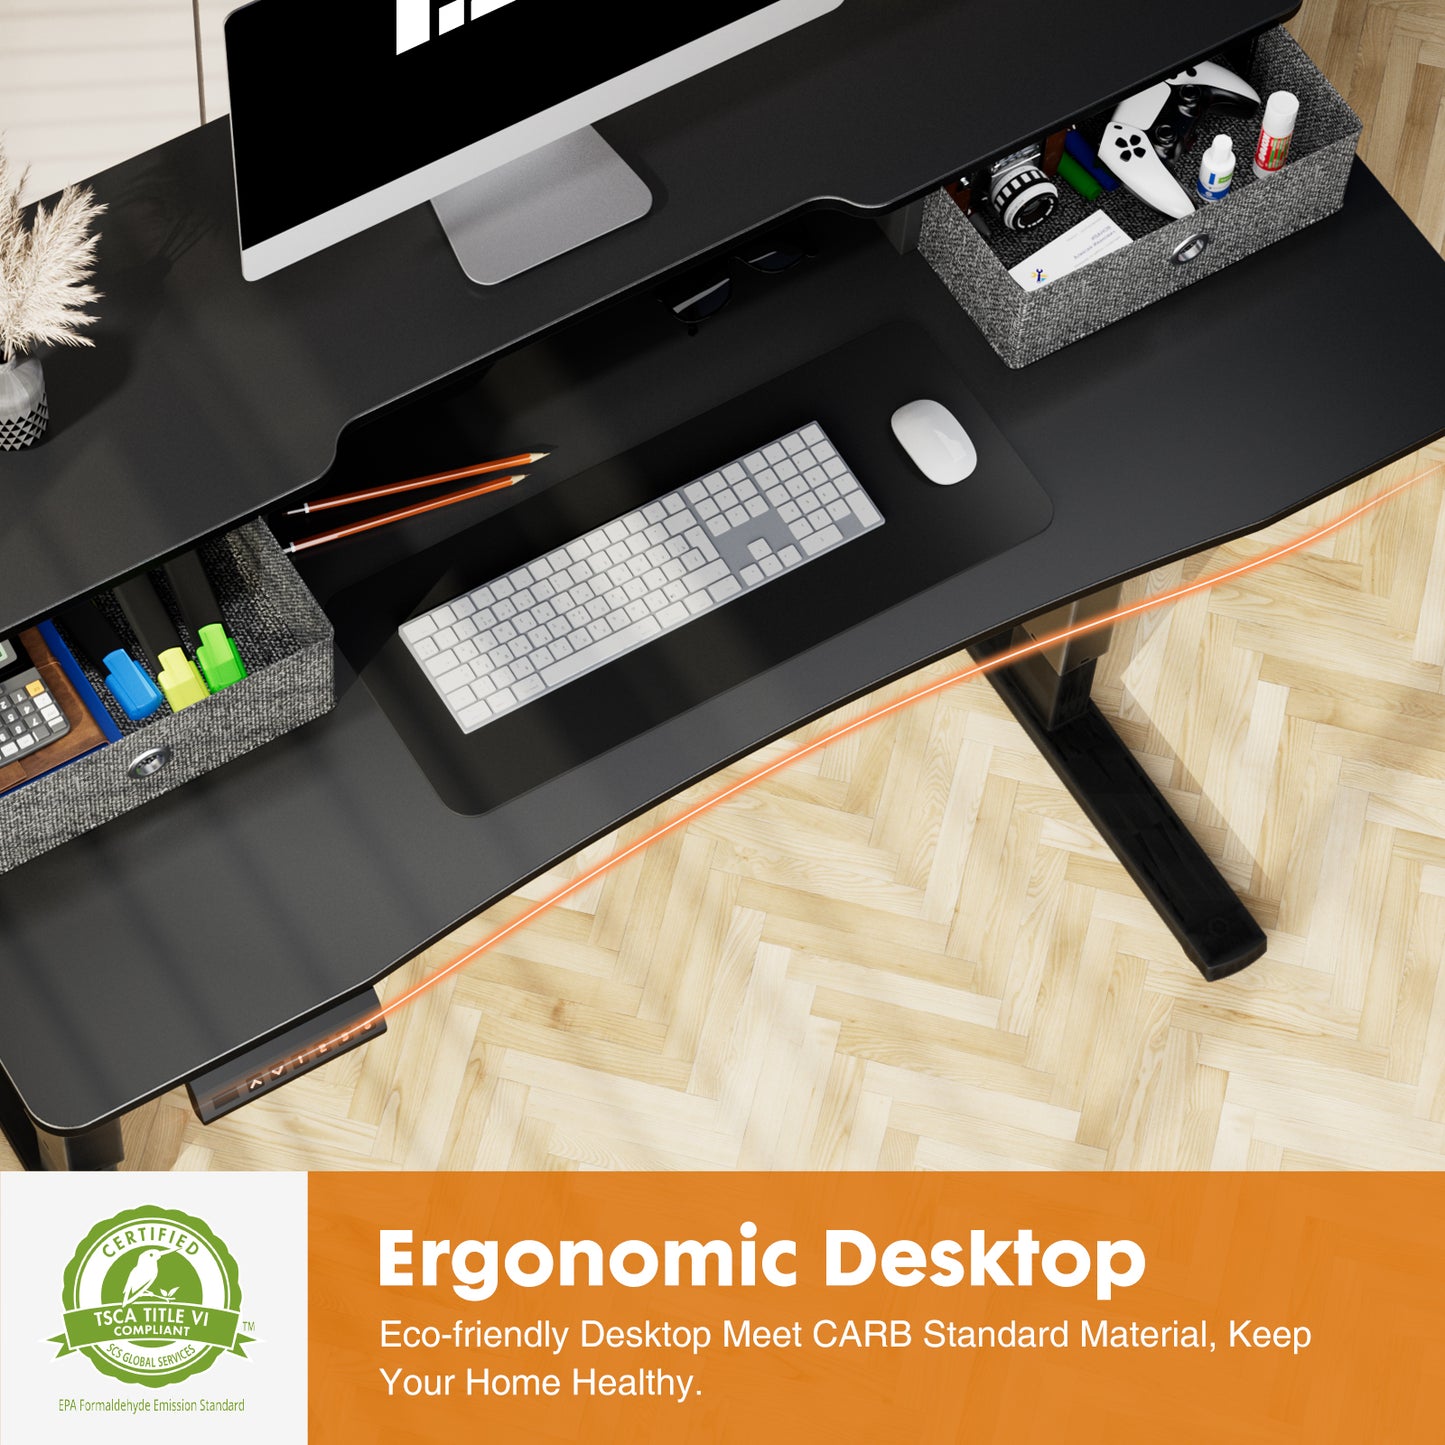 Ergonomic Electric Sit-Stand Desk with Storage and Double Drawers by Sweetcrispy